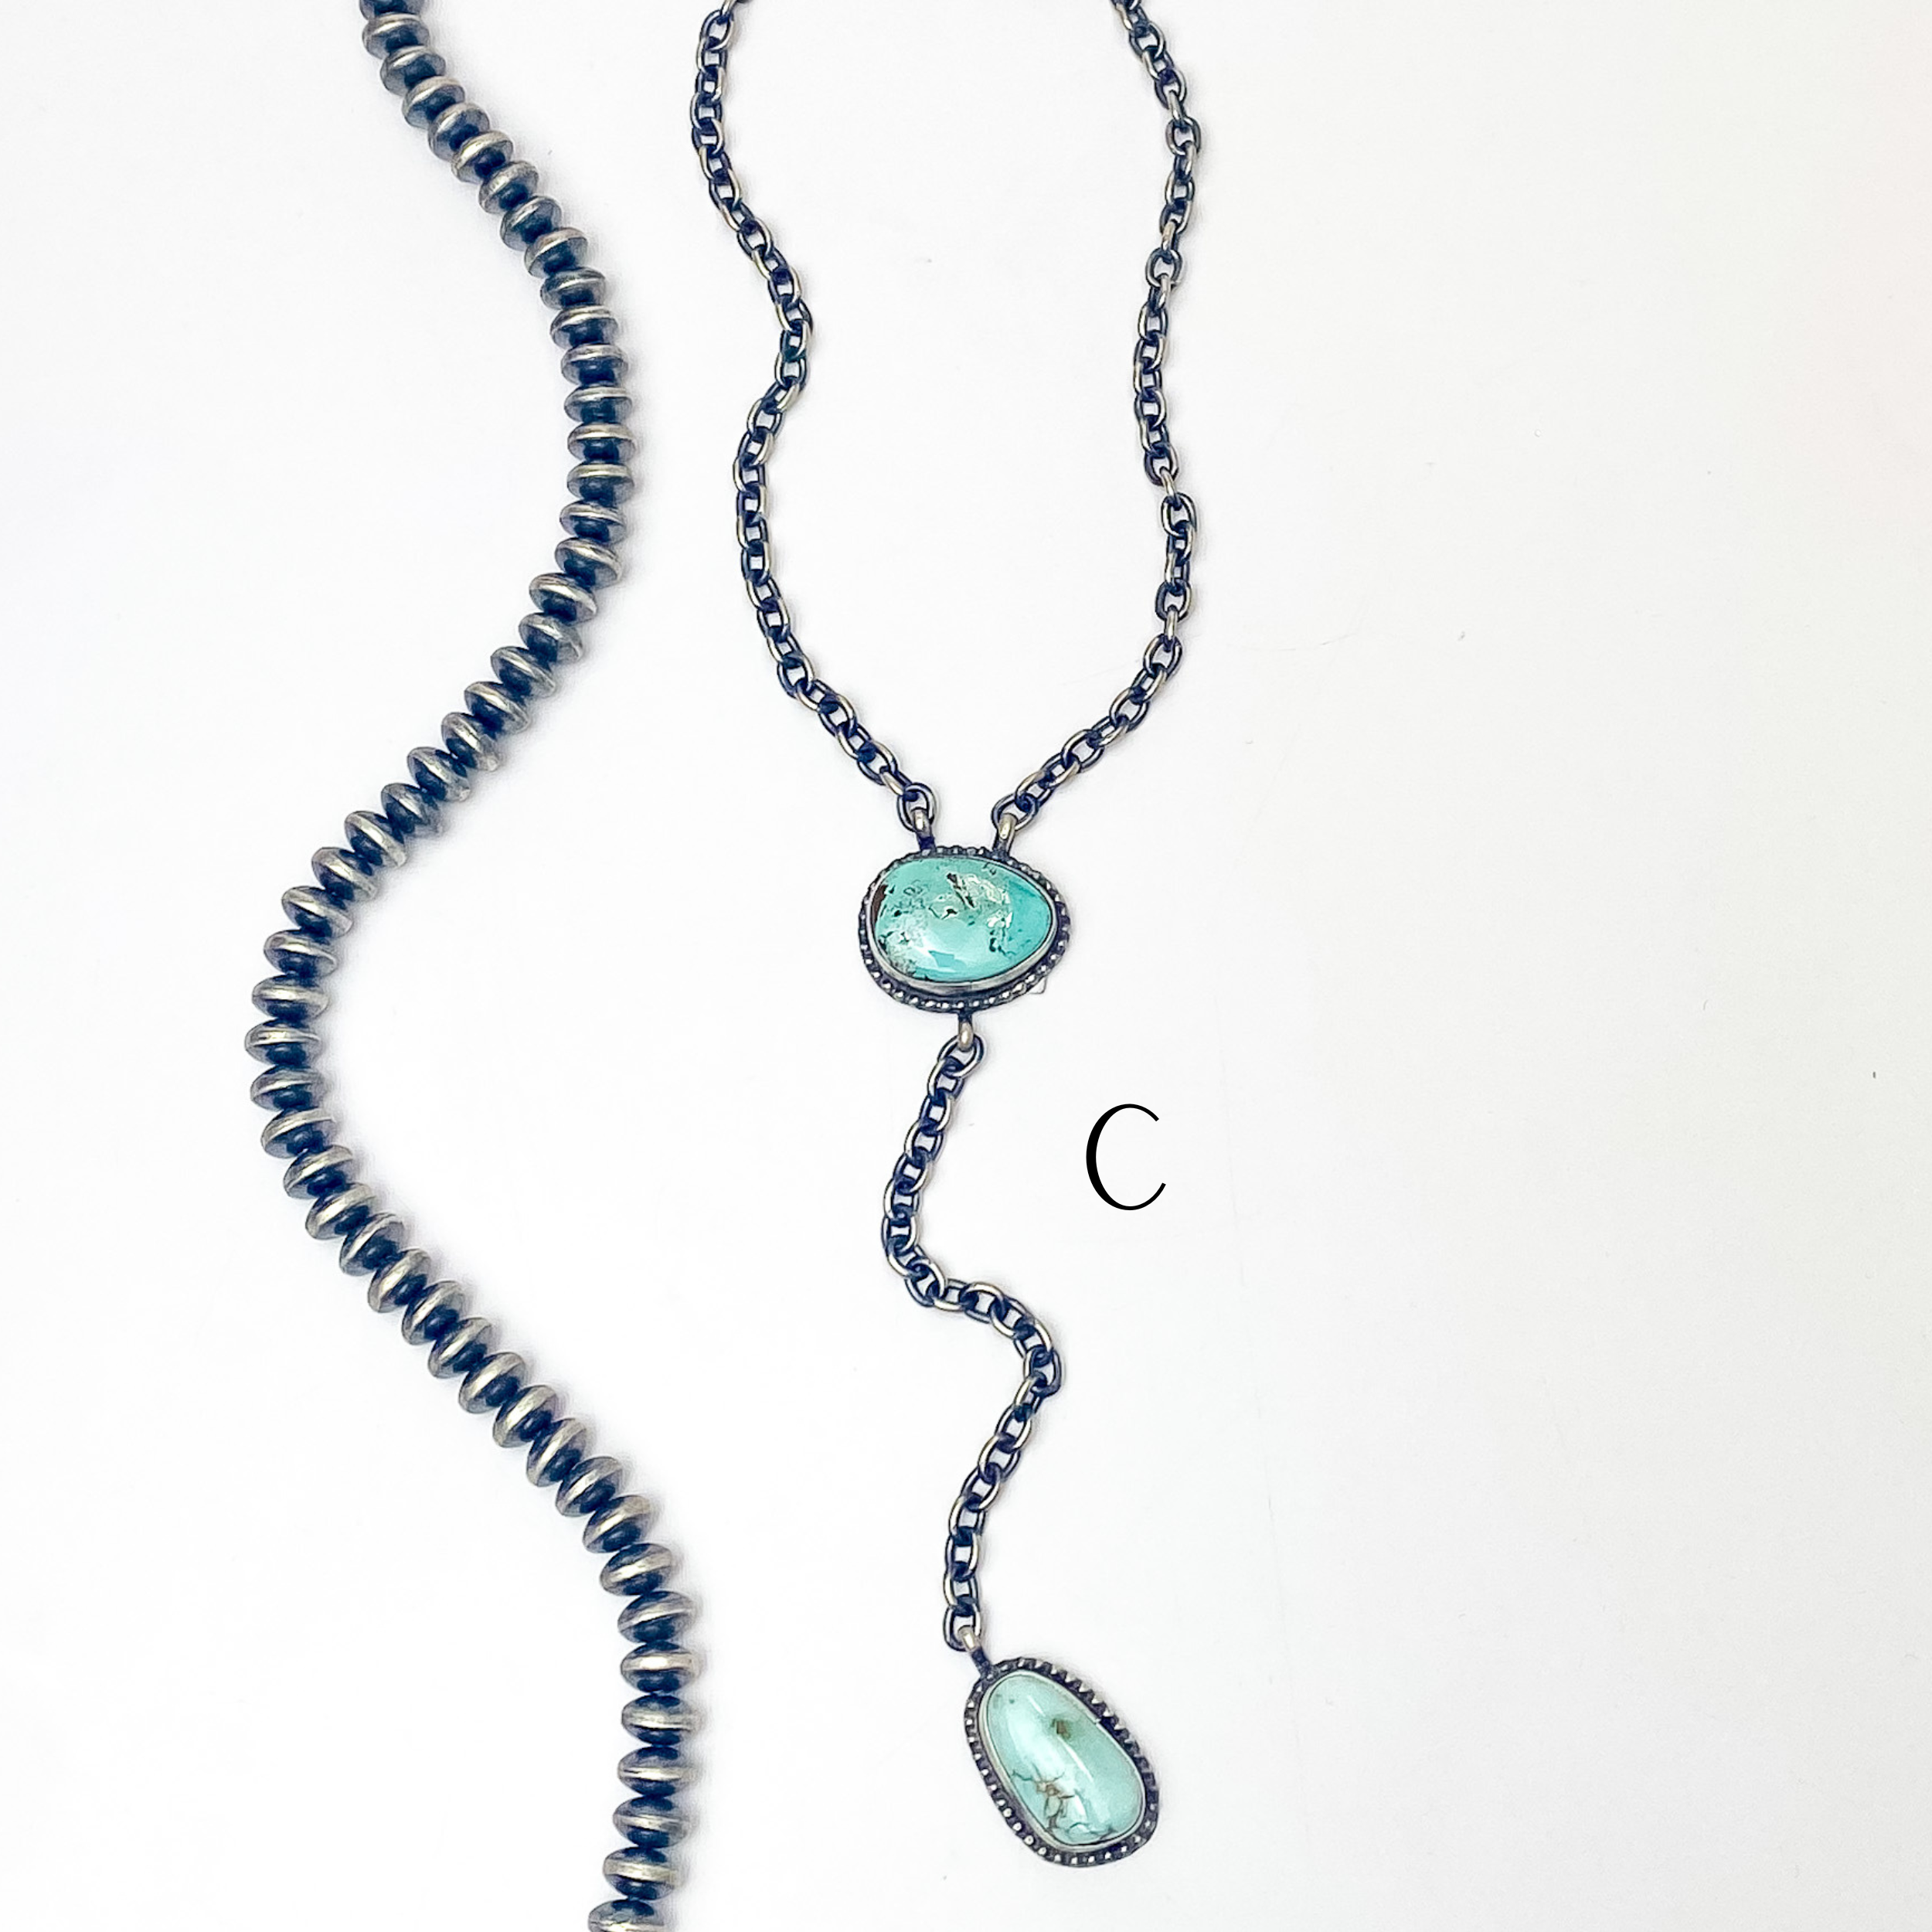 Tim Smith | Navajo Handmade Sterling Silver Lariat Necklace with Turquoise Stones - Giddy Up Glamour Boutique